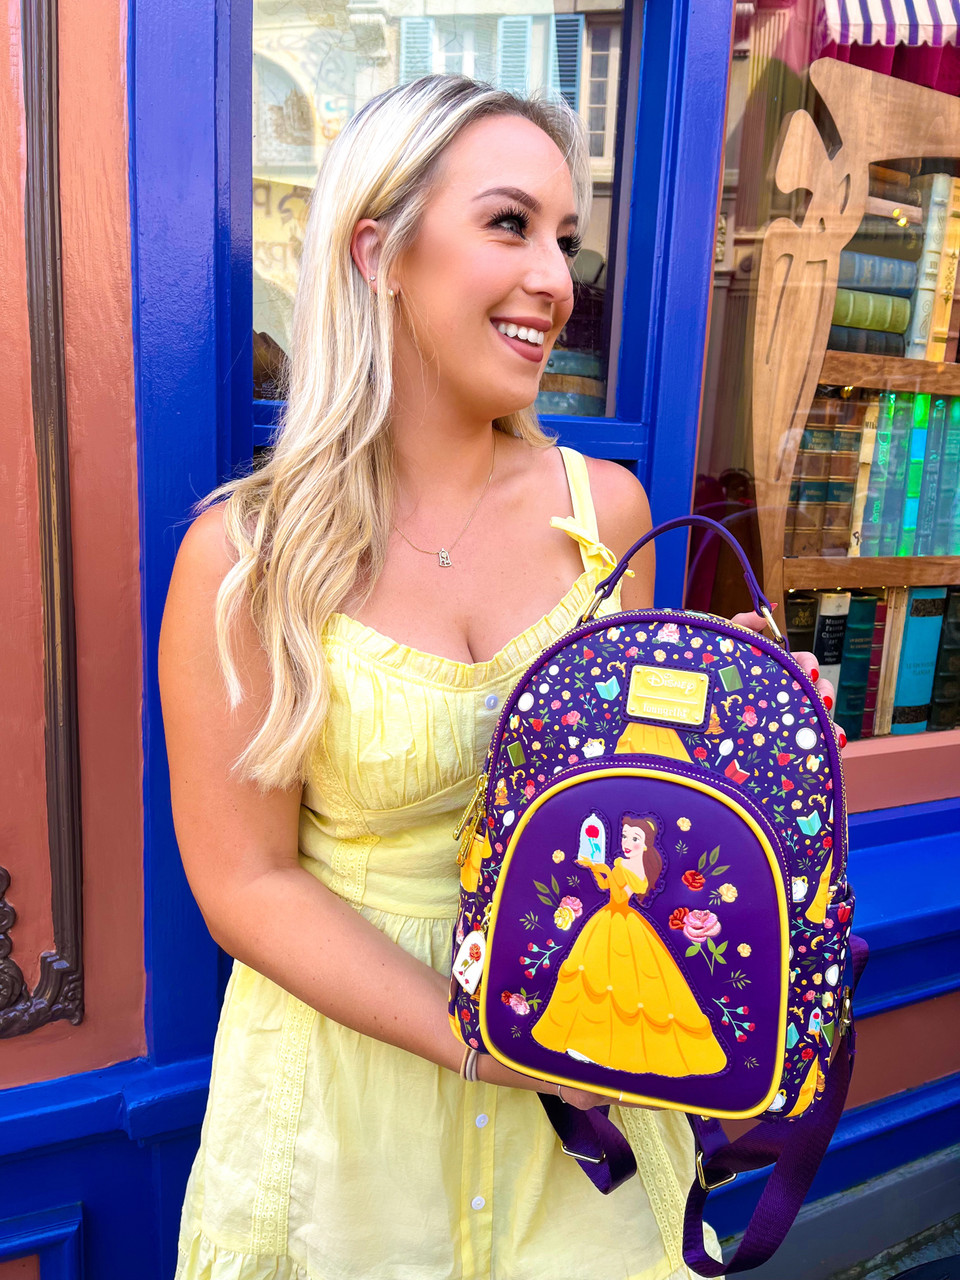 Disney Loungefly Bag - Beauty and the Beast - Belle Floral